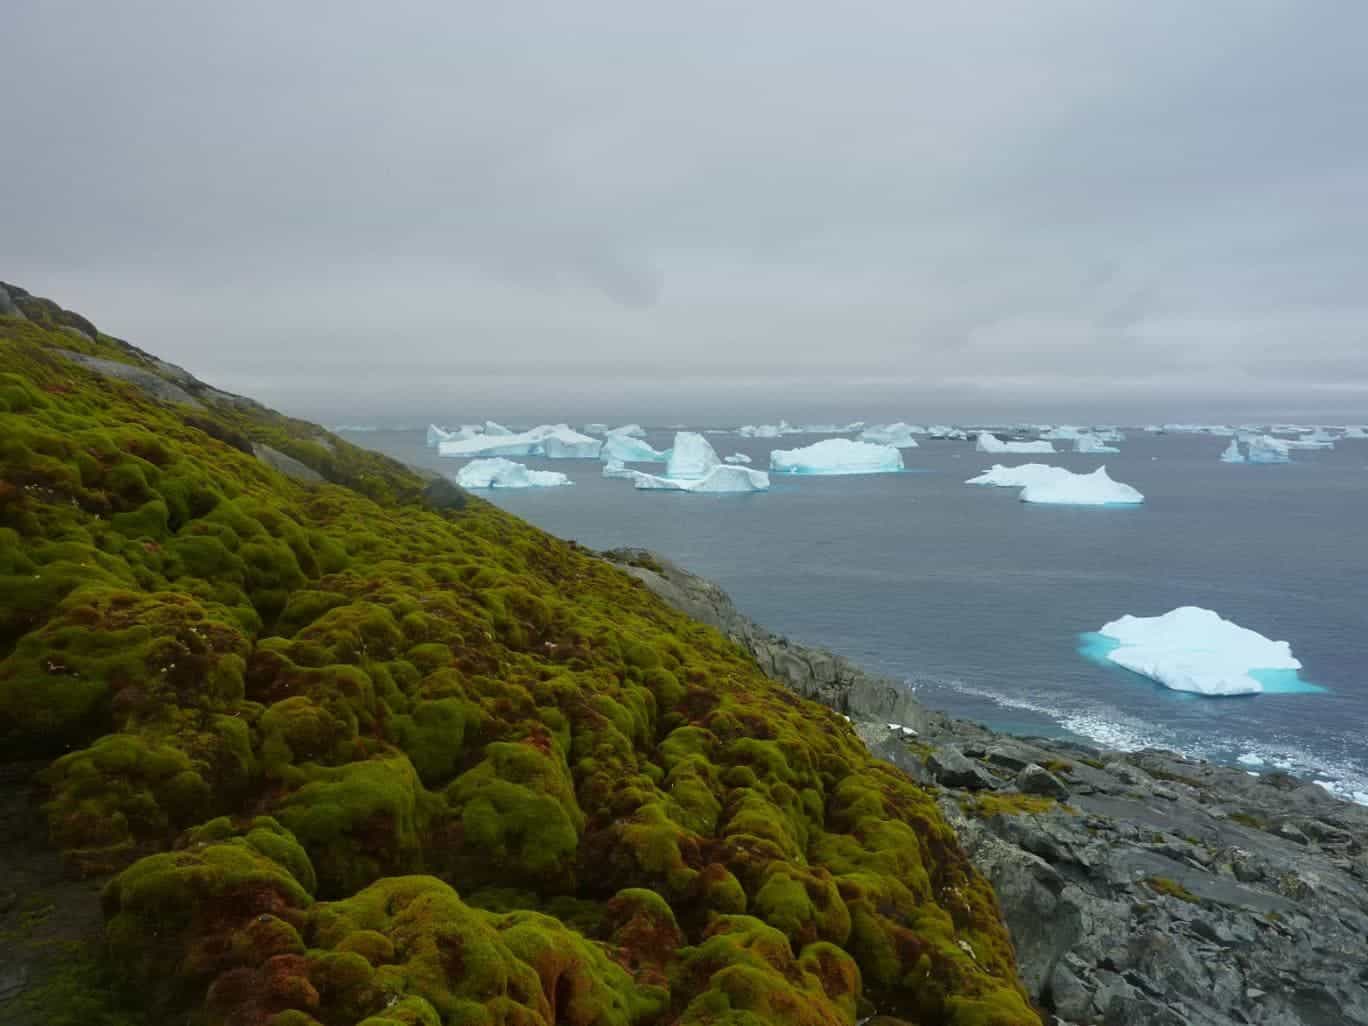 A bank of moss on the appropriately named Green Island in the Antarctic. Image credits: Matt Amesbury.